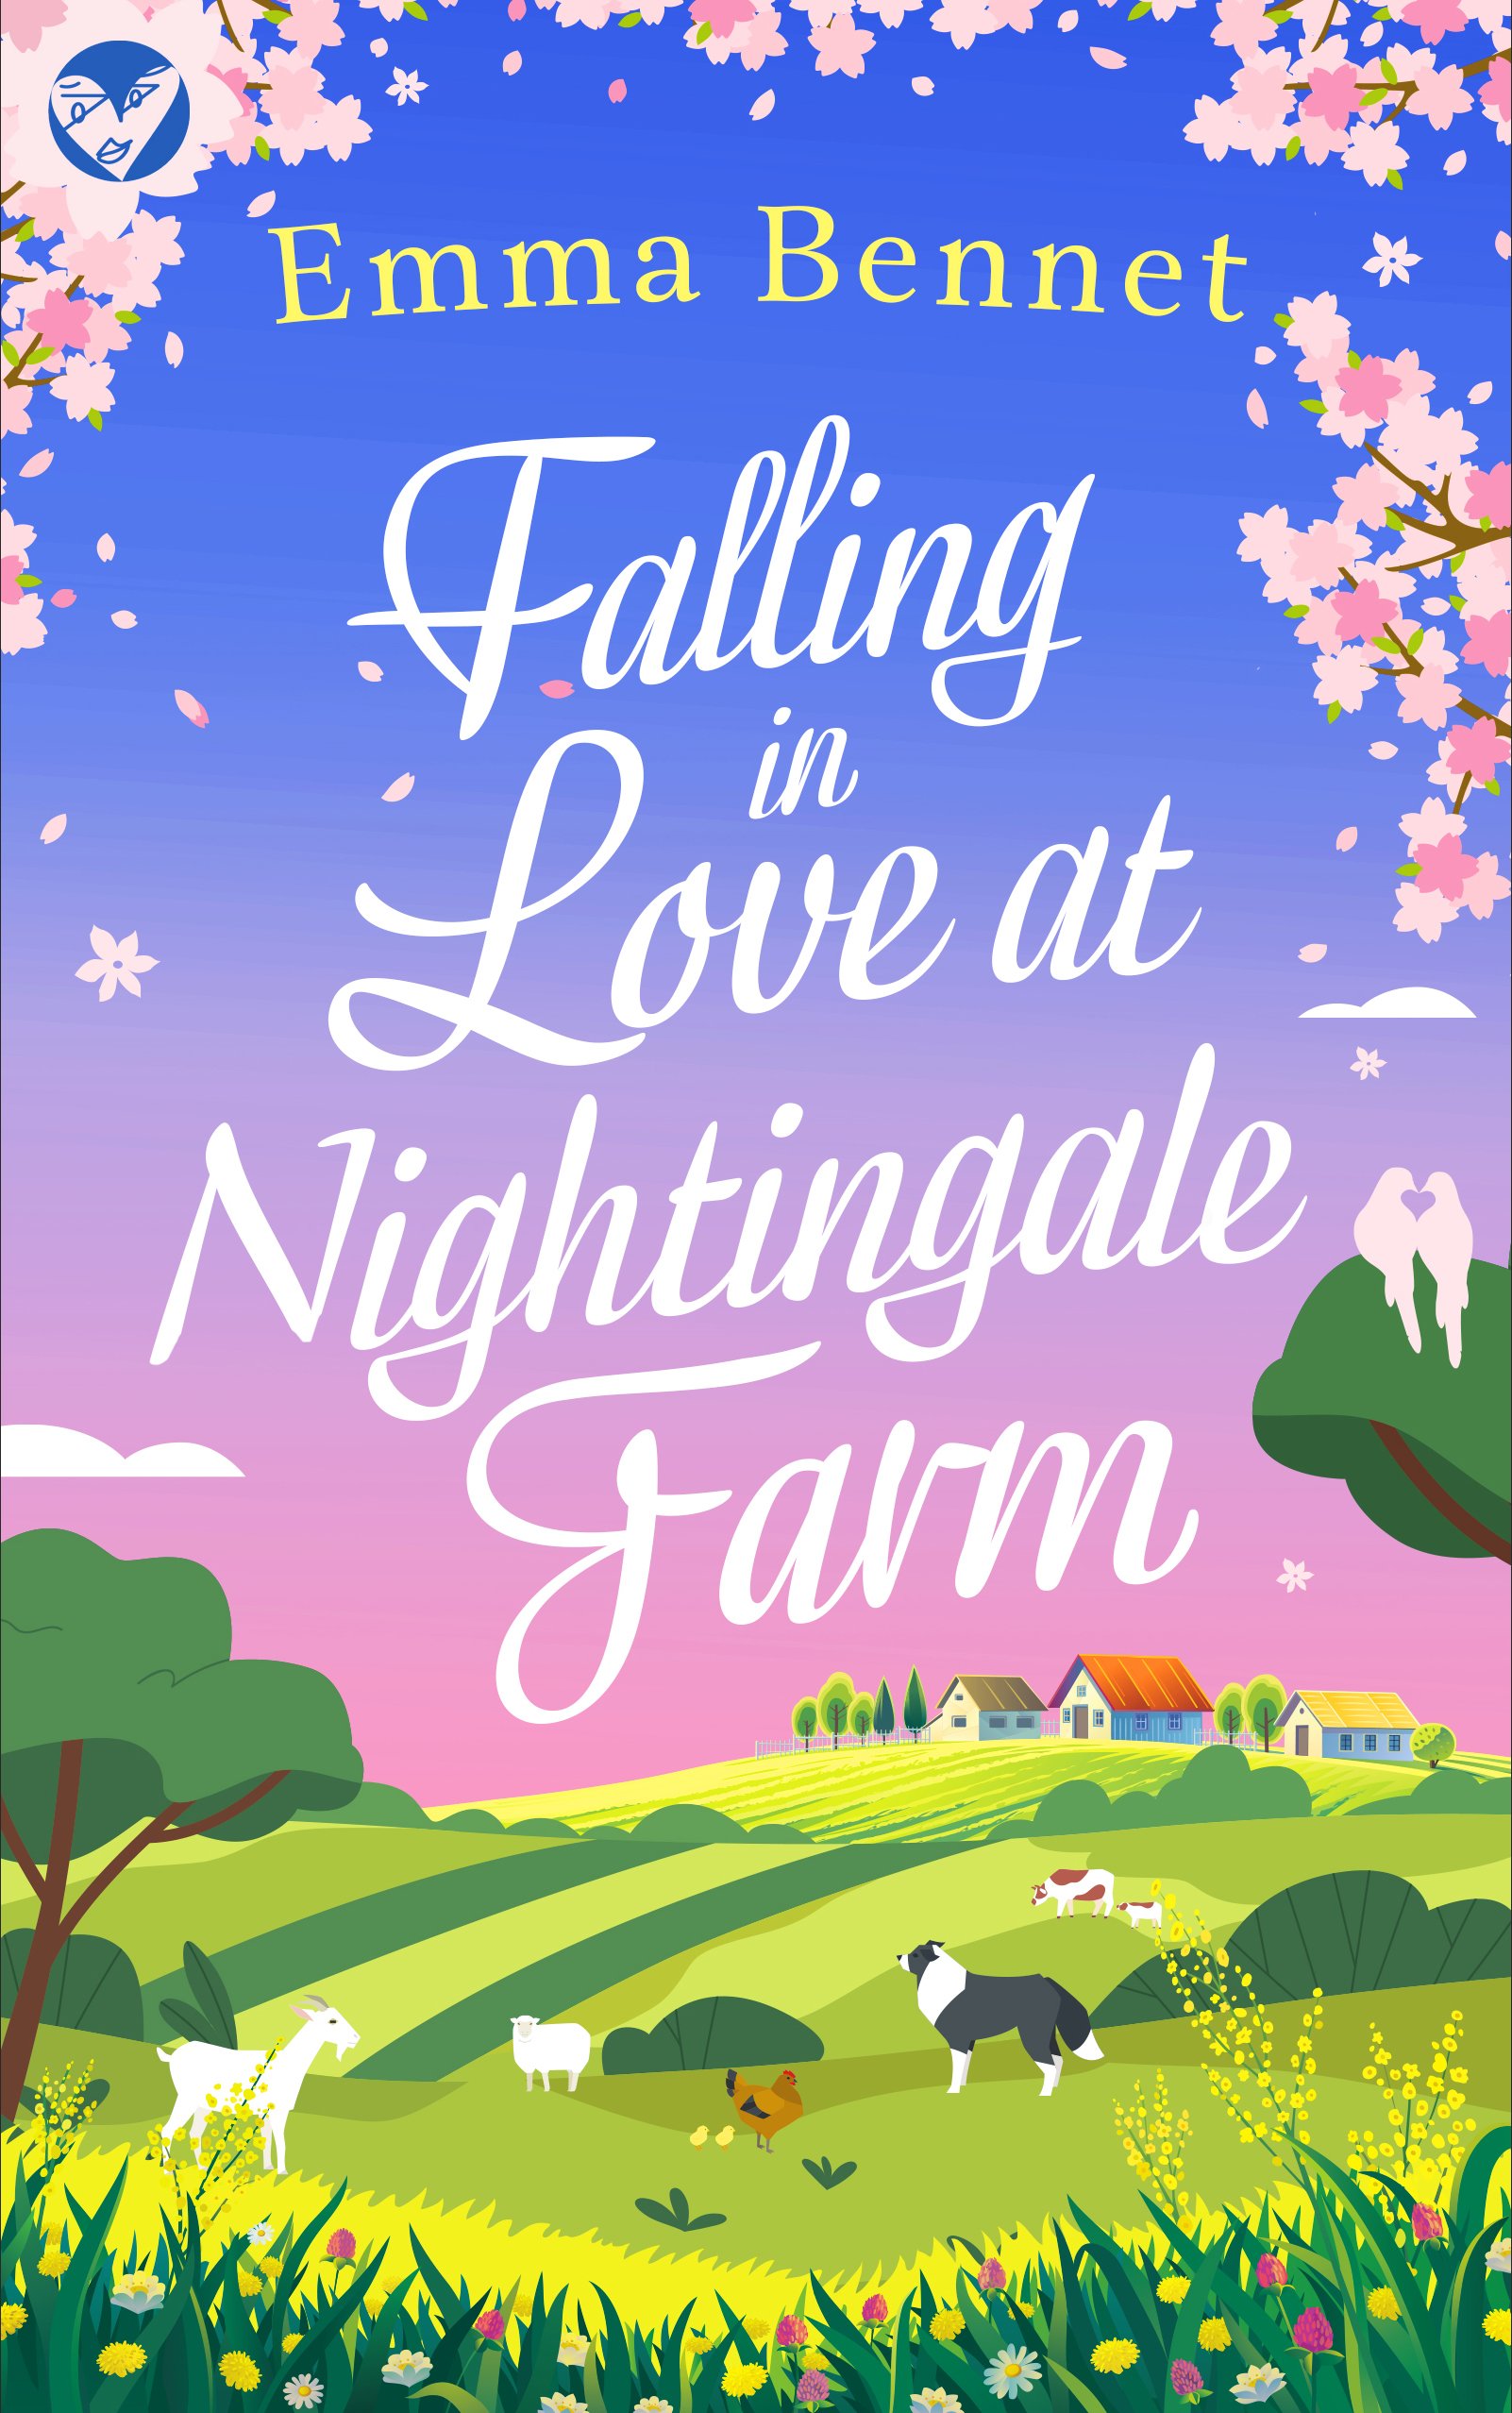 FALLING IN LOVE AT NIGHTINGALE FARM Cover publish.jpg